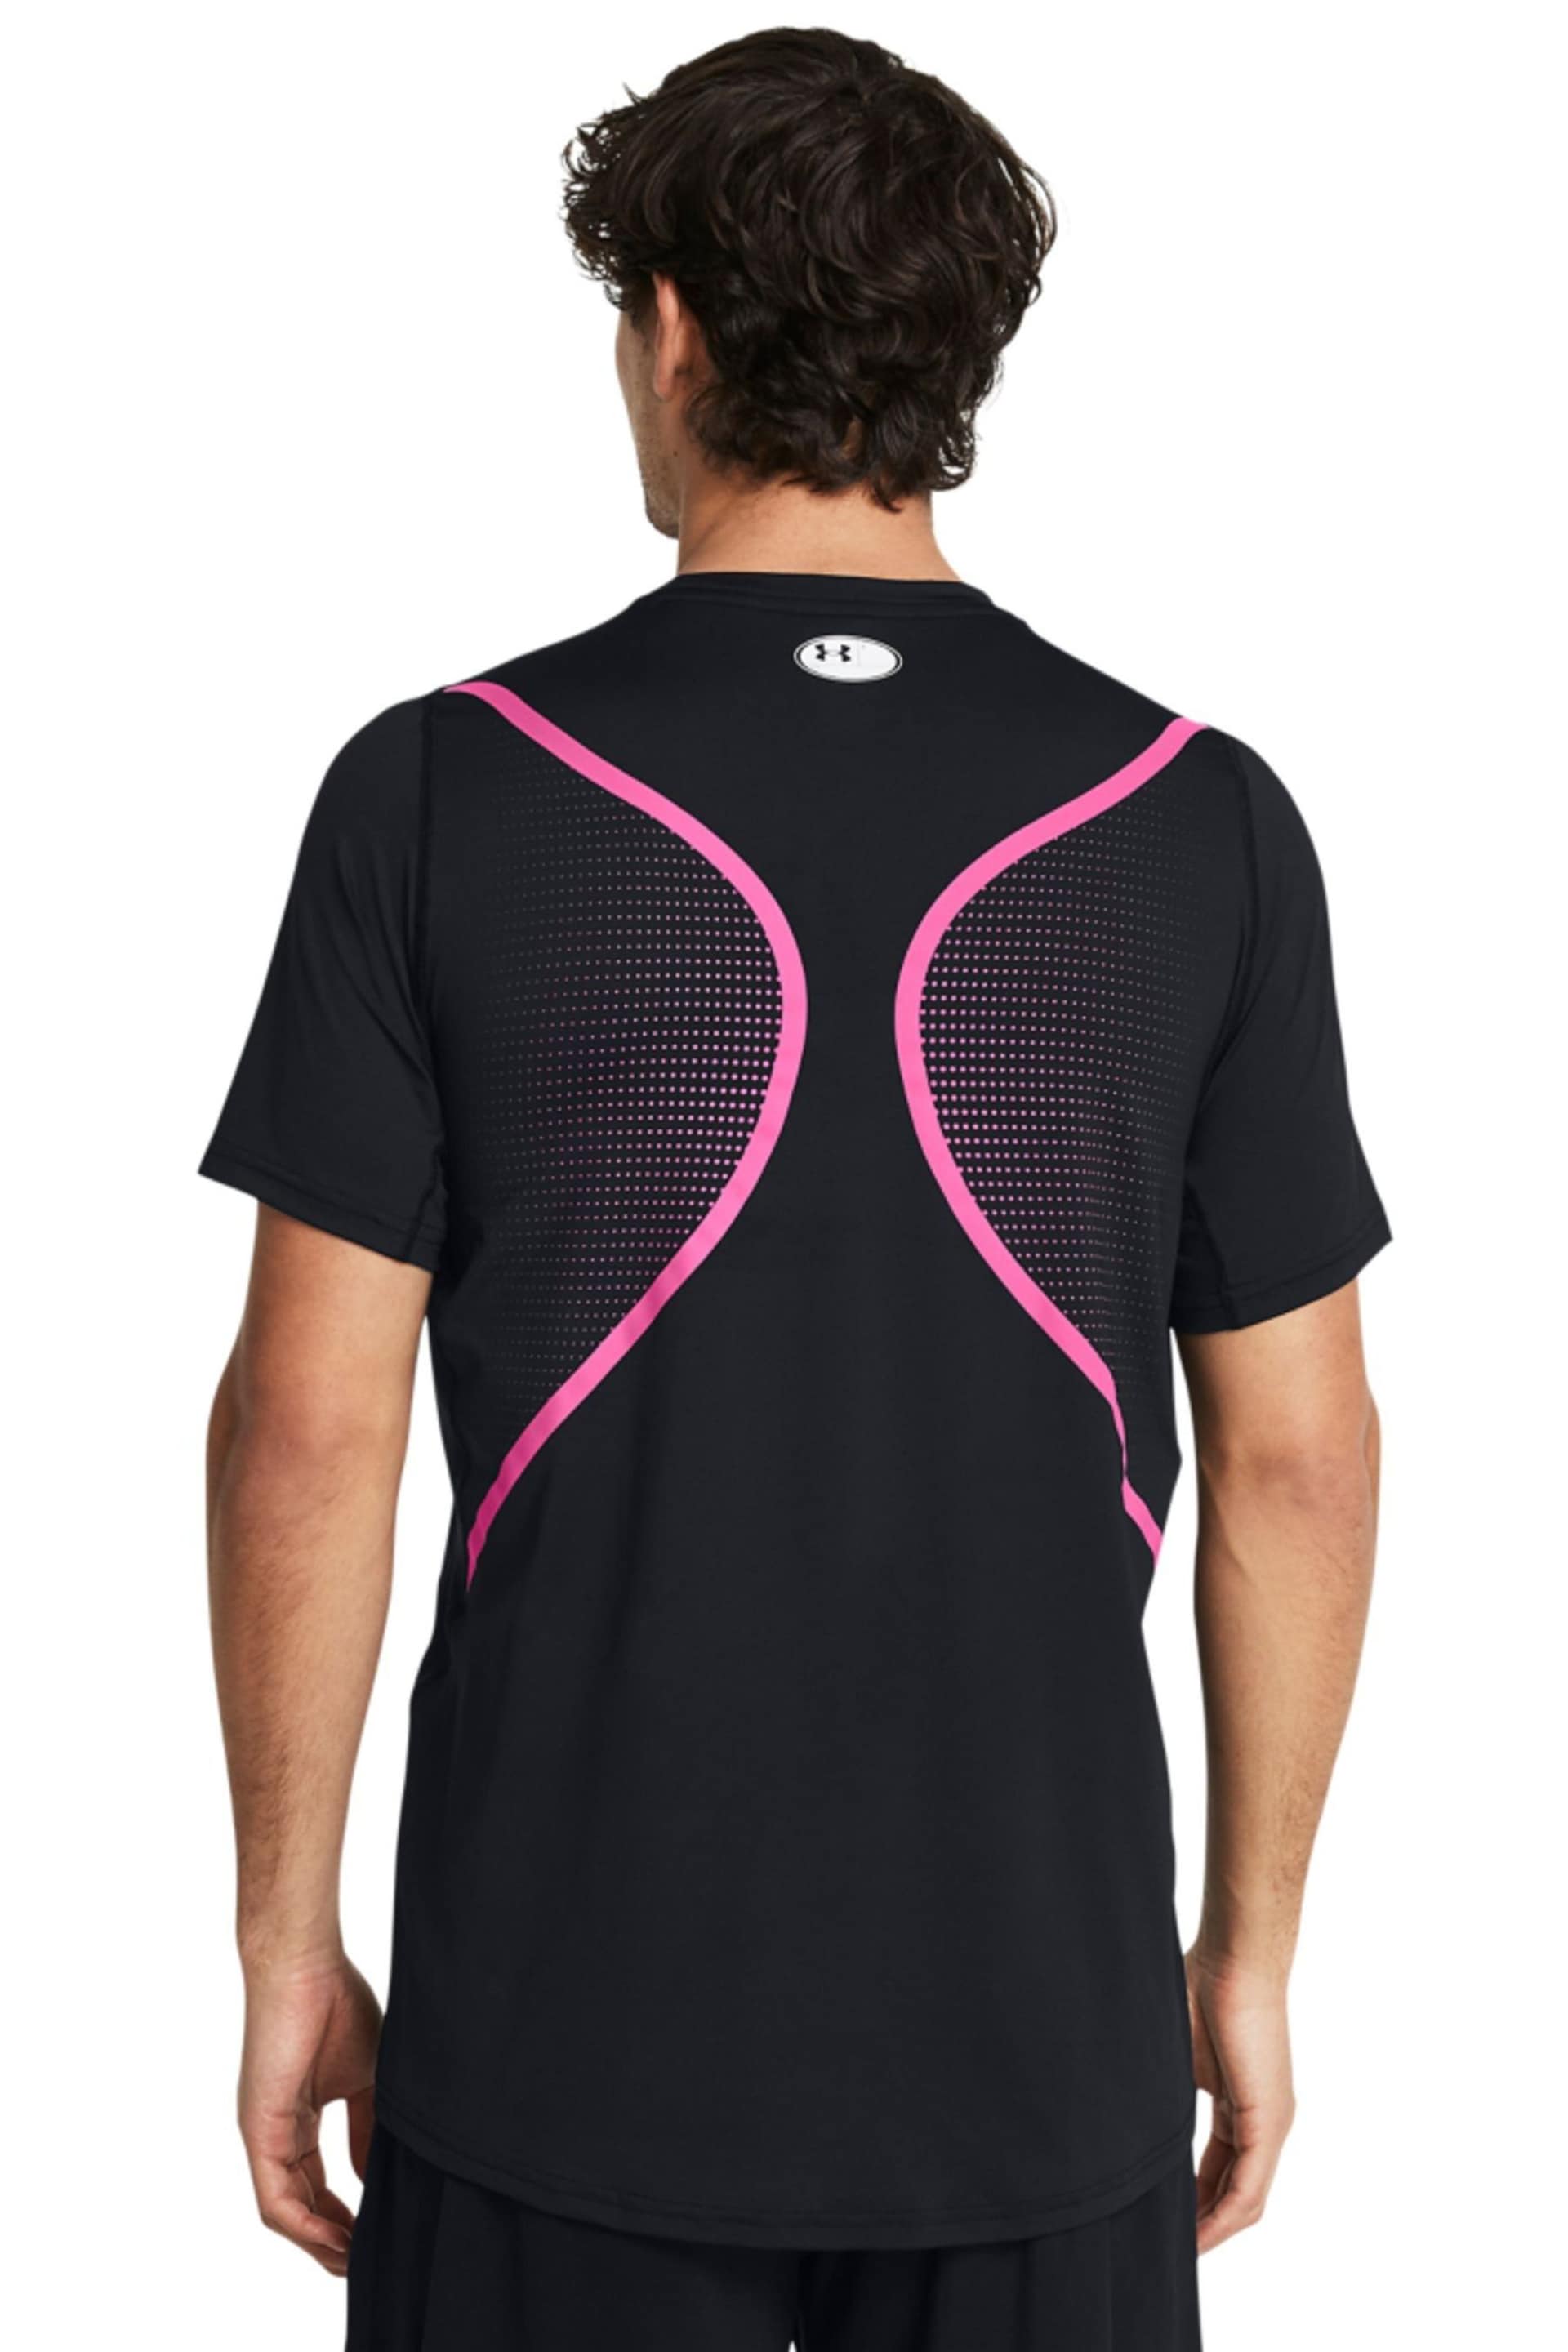 Under Armour Black/Pink HeatGear Fitted Short Sleeve T-Shirt - Image 2 of 4